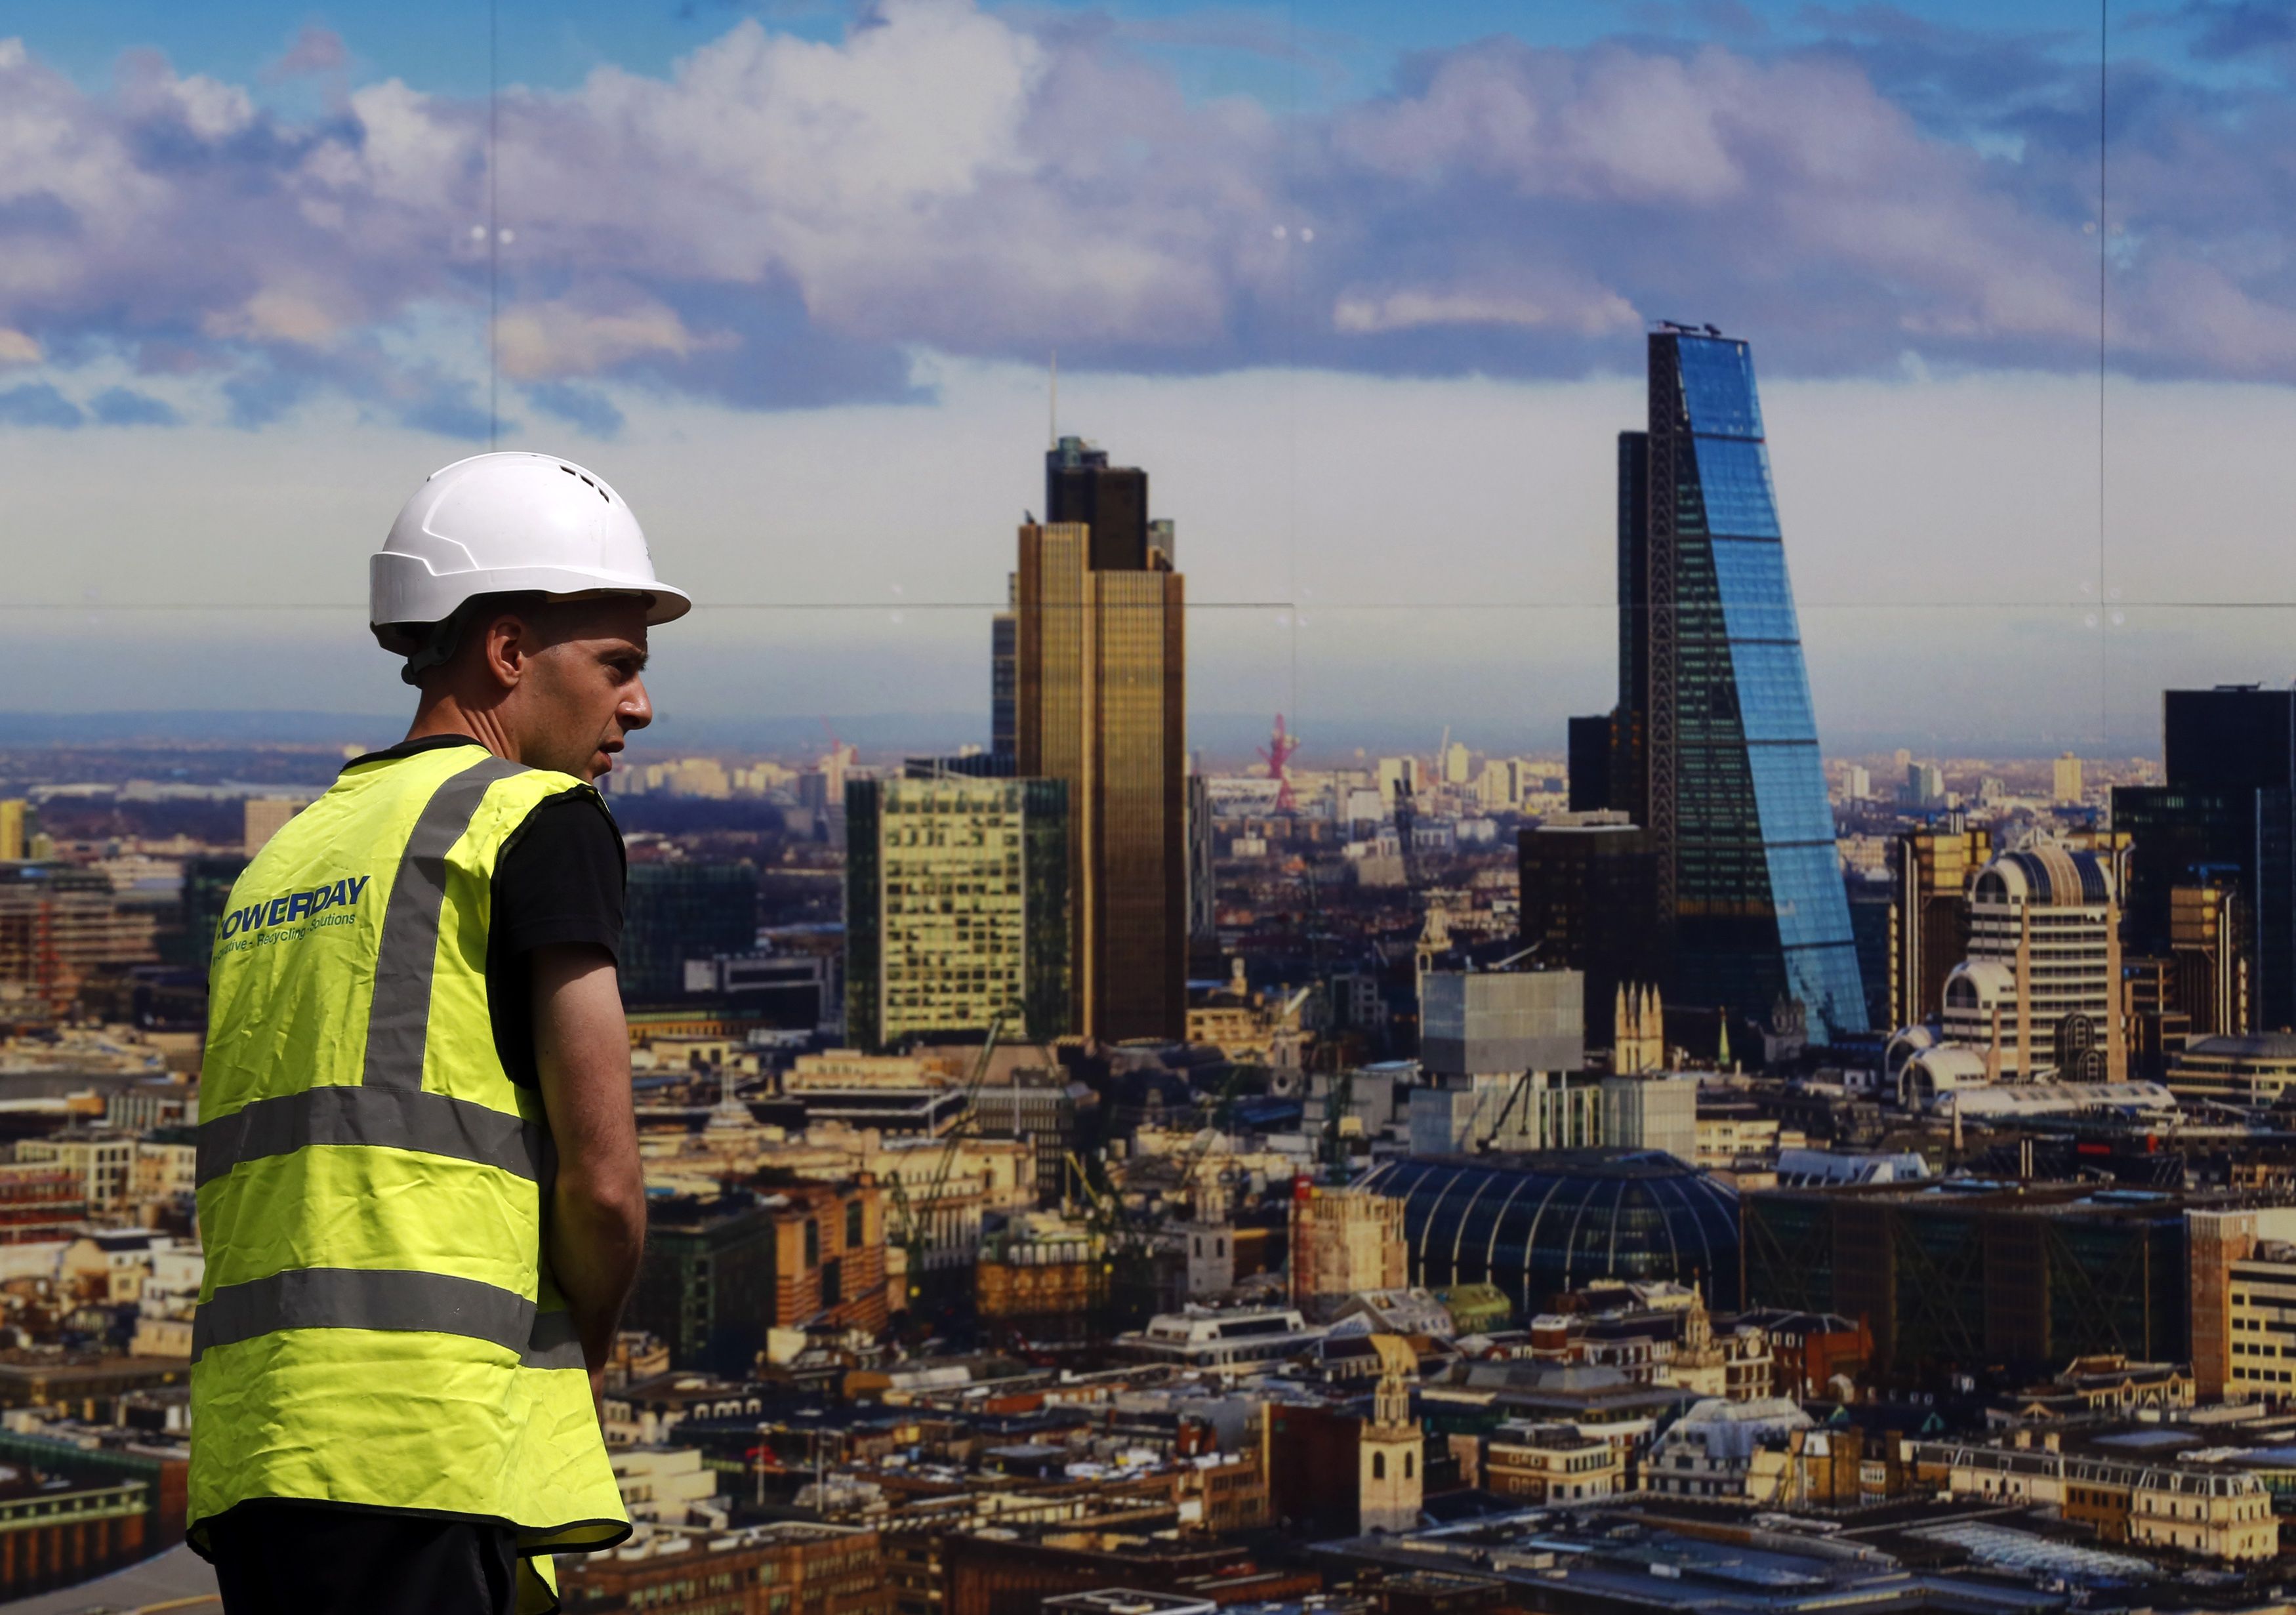 London's Southeast quarter is undergoing regeneration as investment moves beyond the expensive city centre. Photo: Reuters